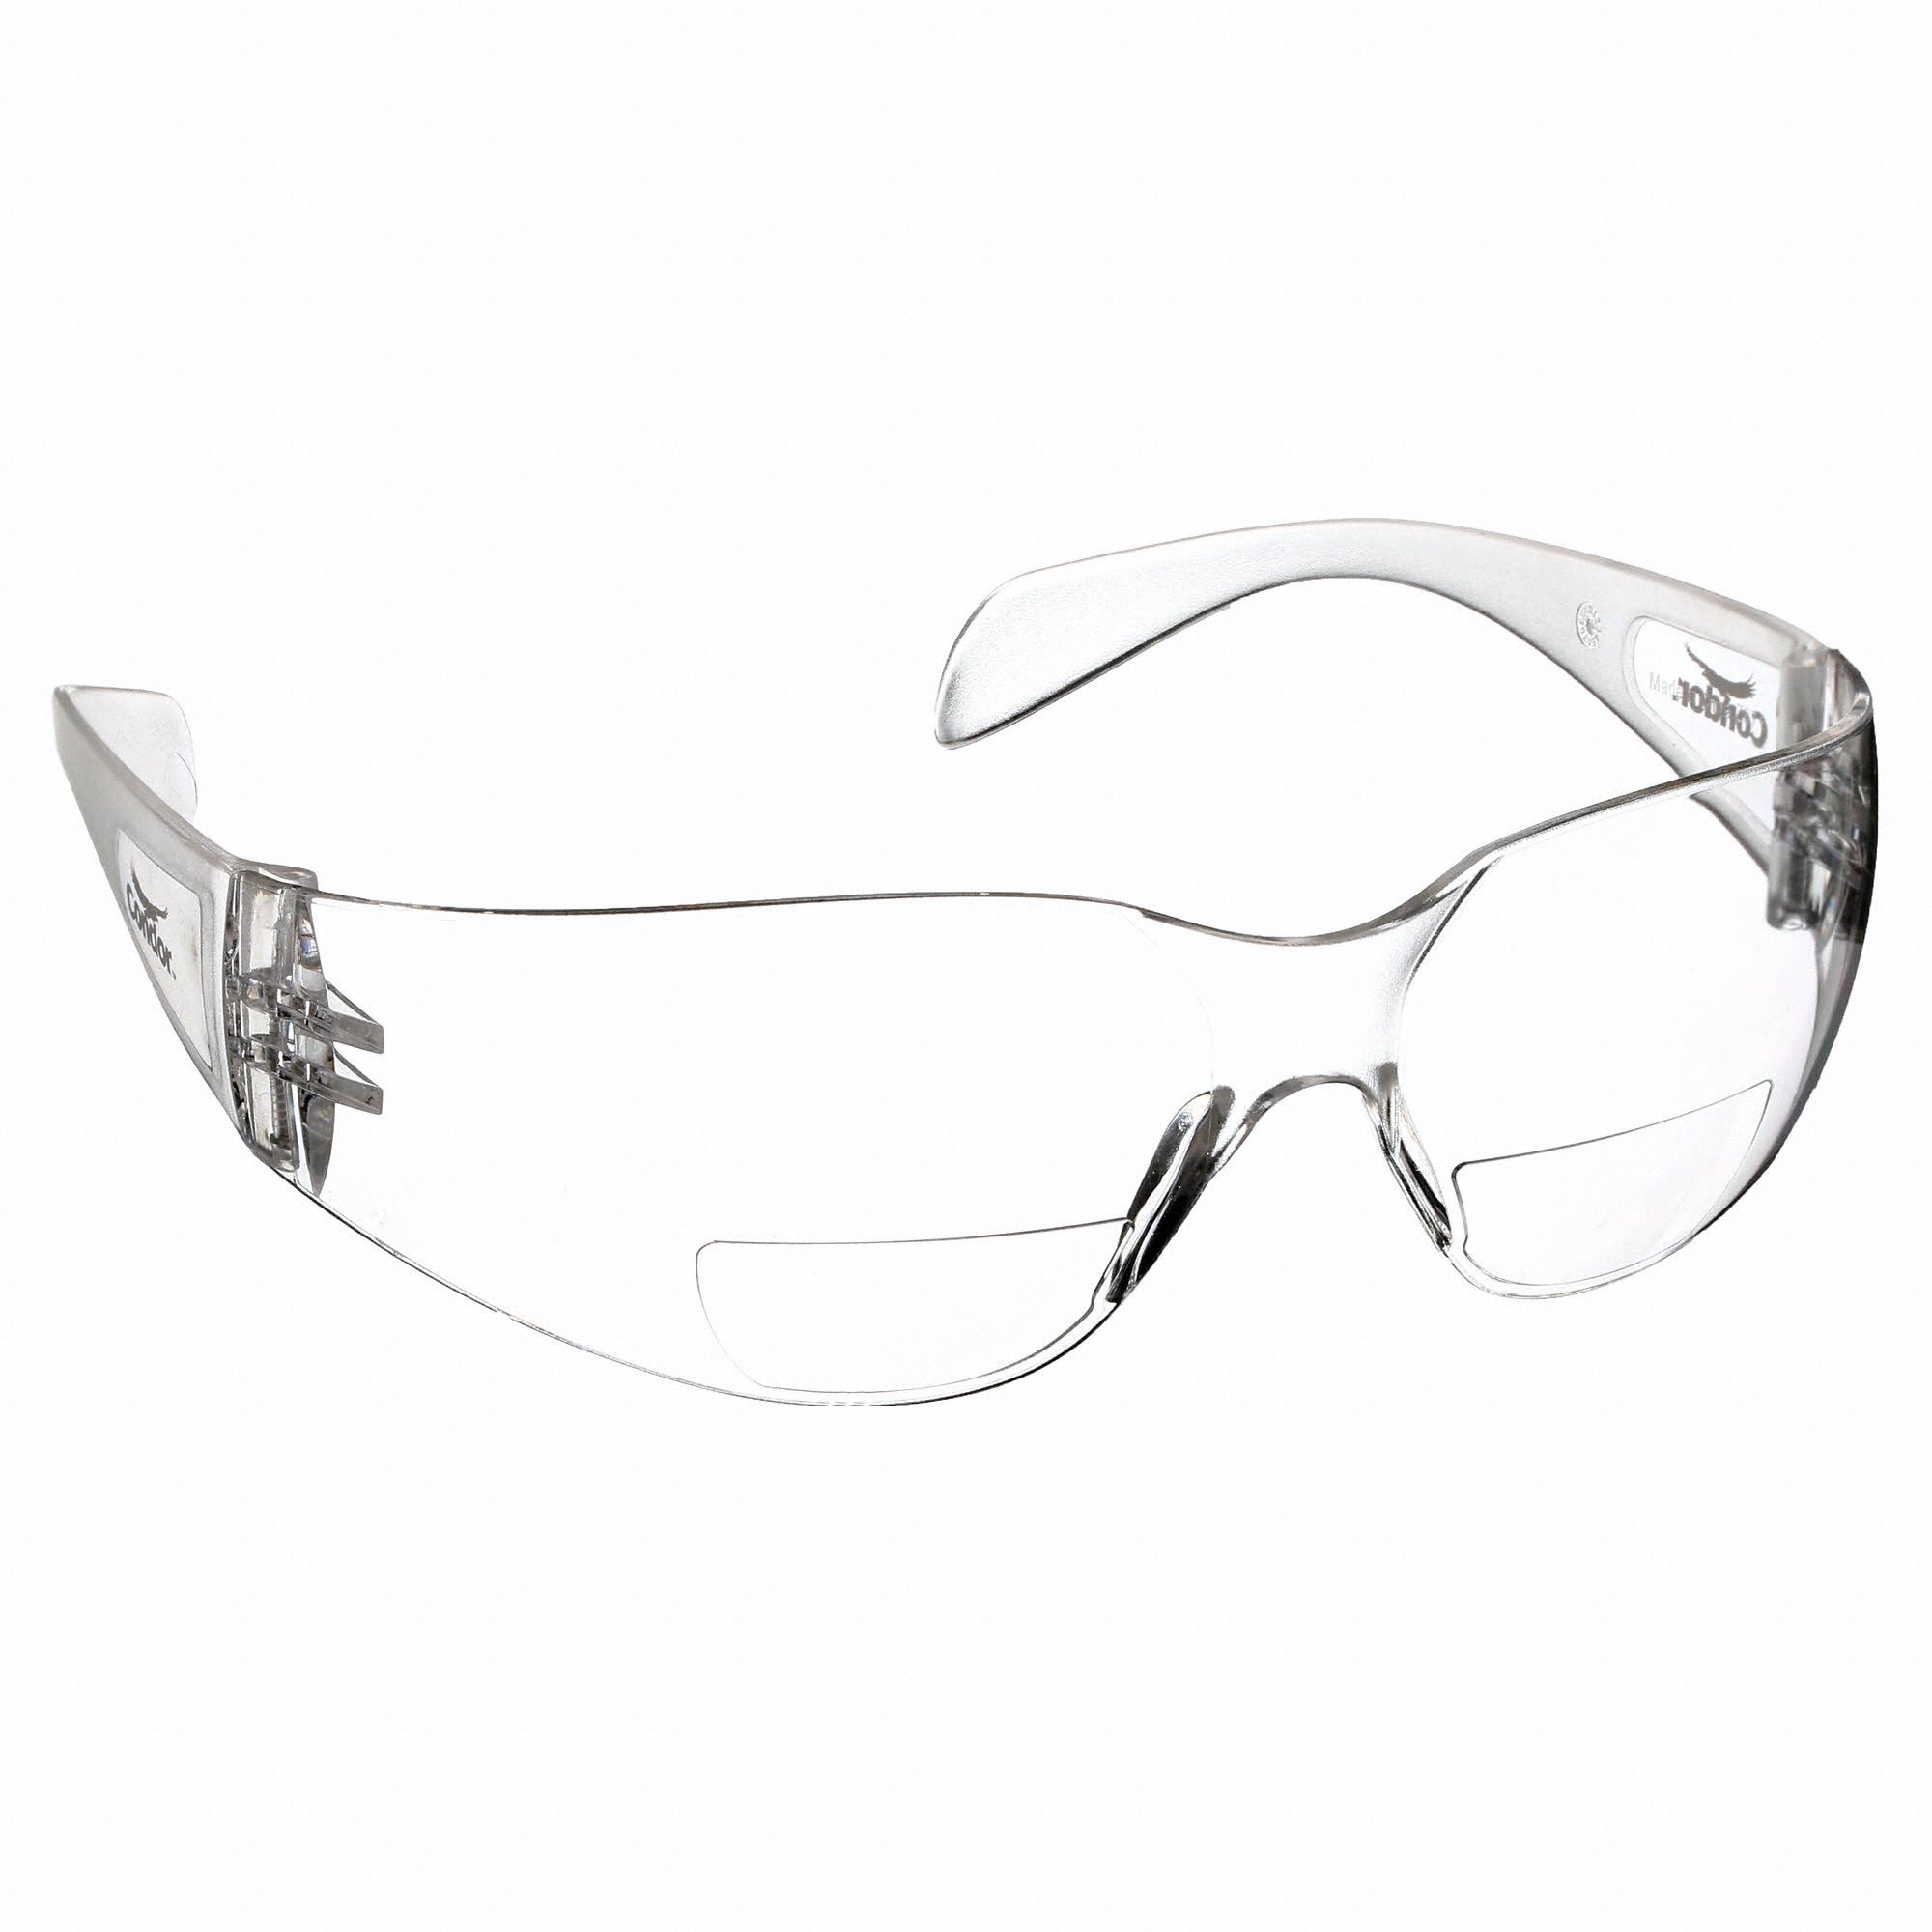 1.75 MS Magnifying Safety Glasses Anti-Fog 